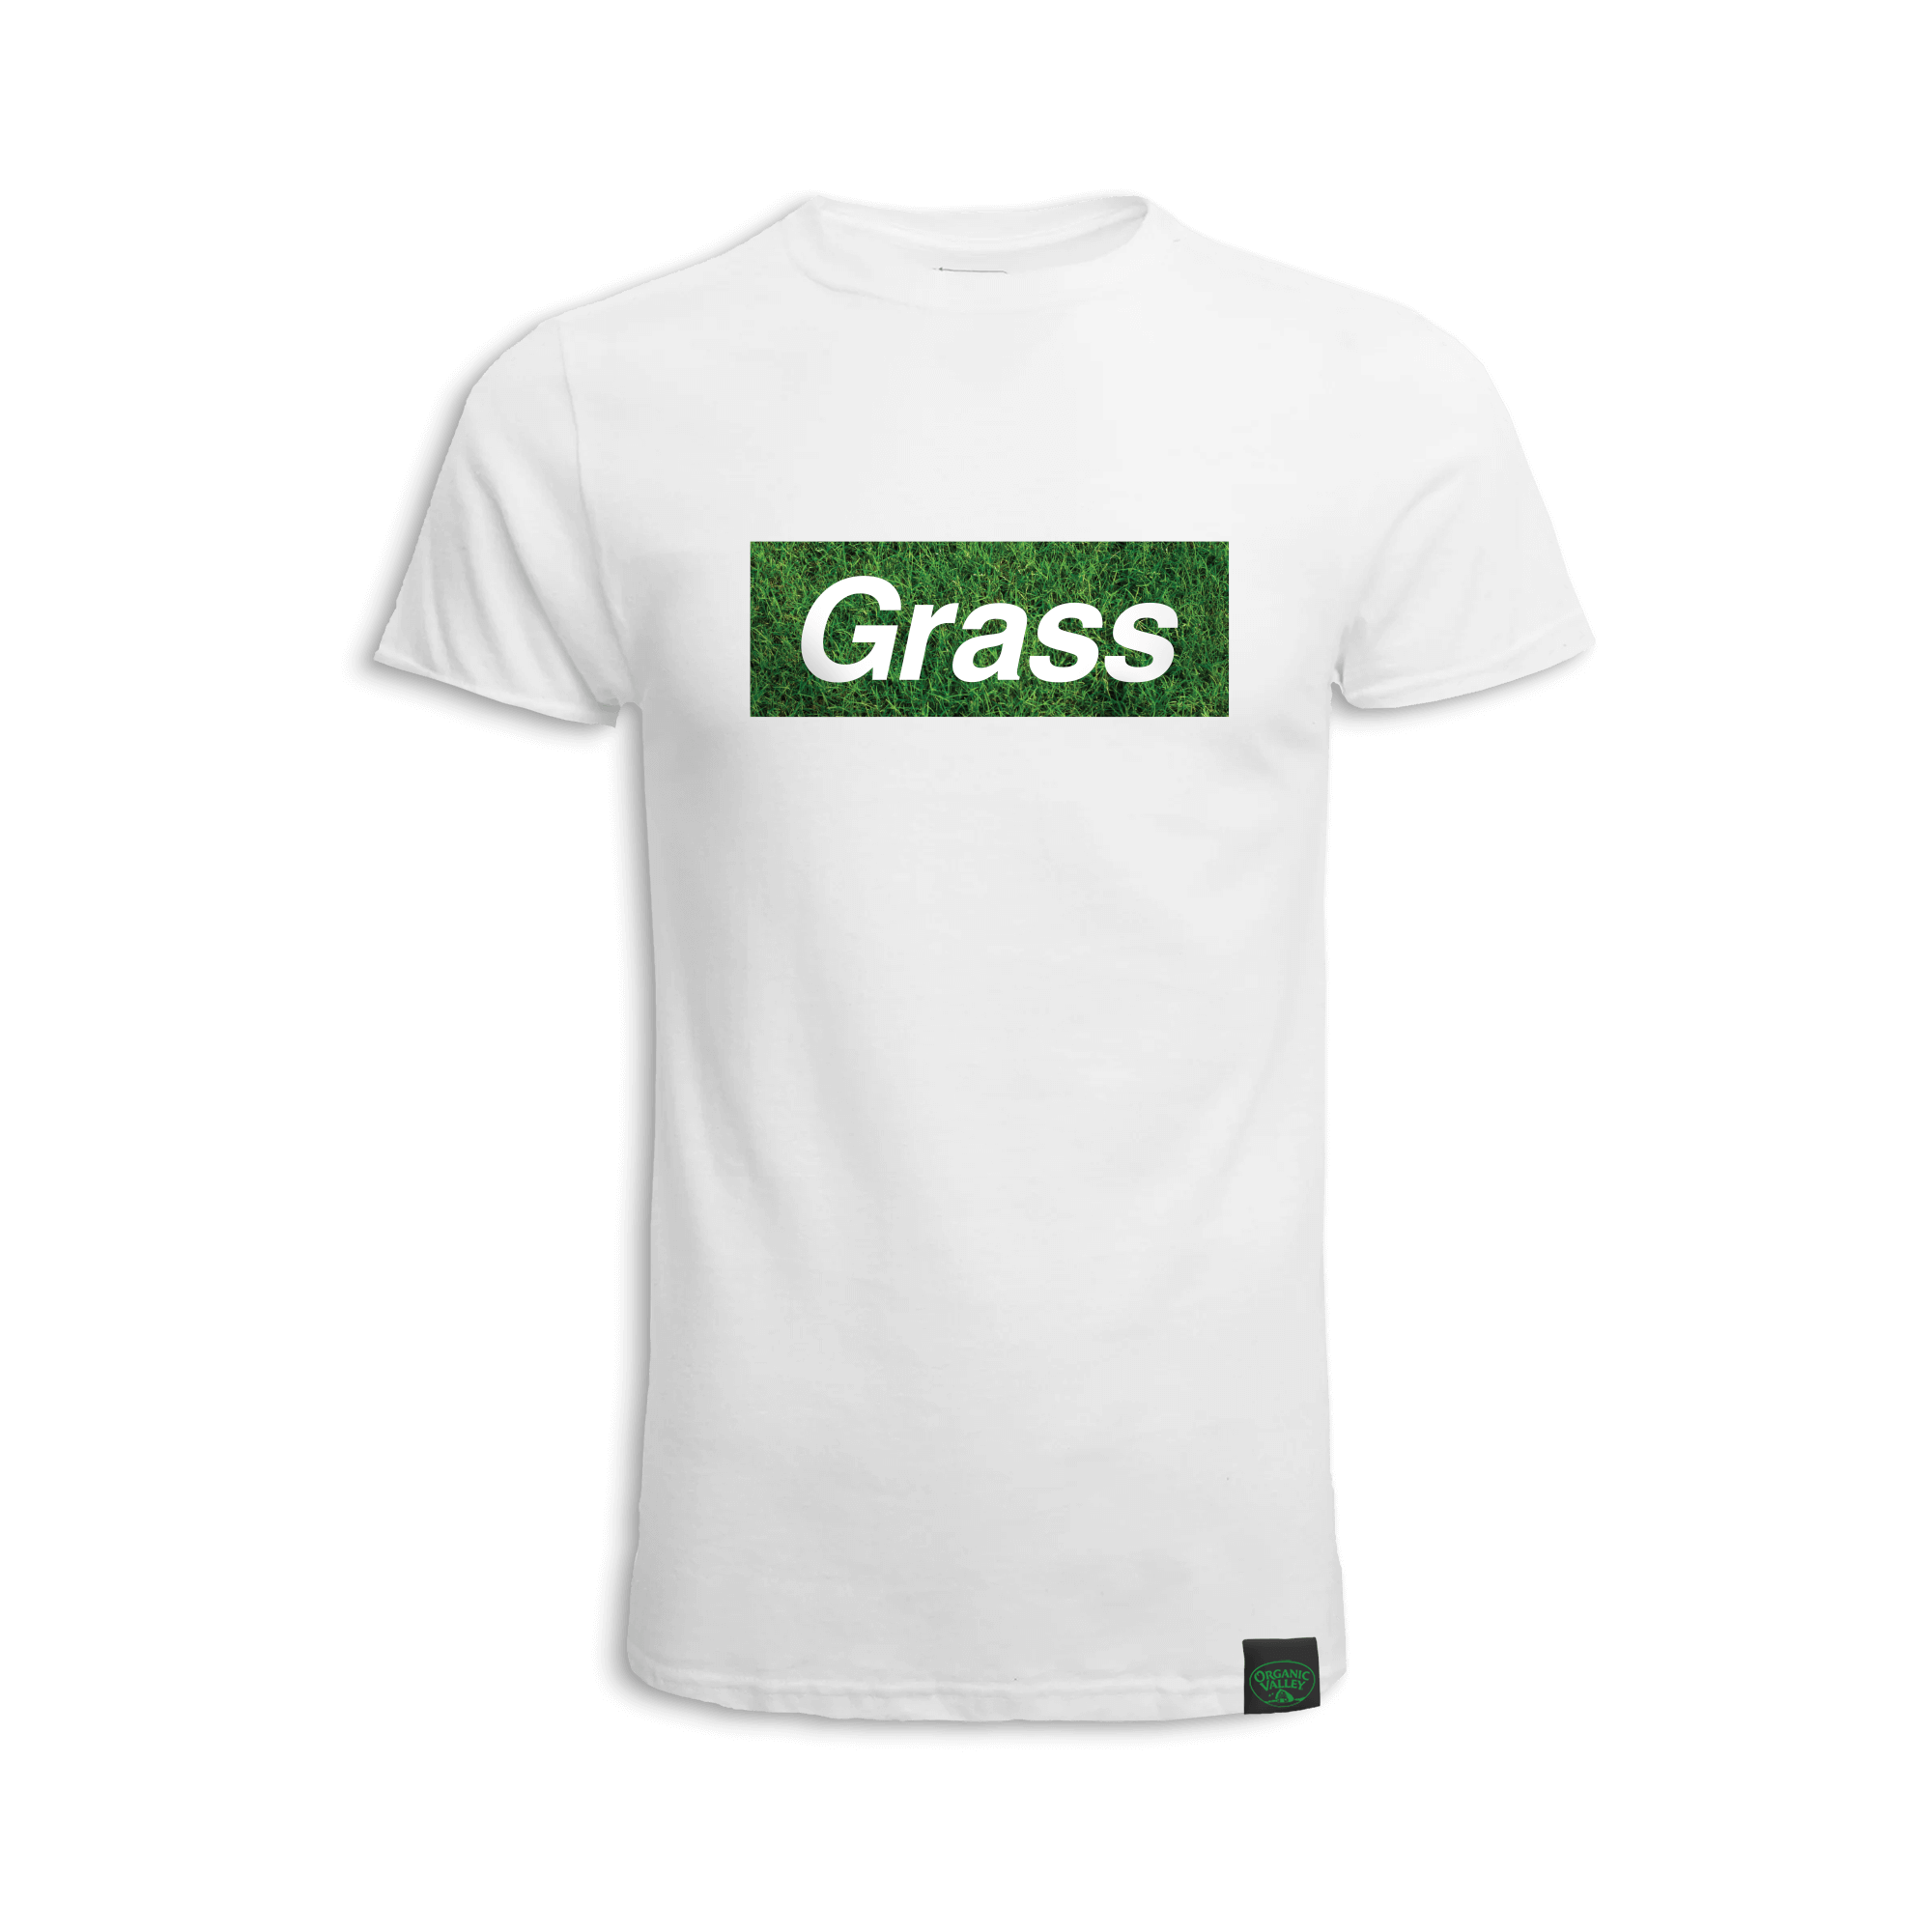 Visit the Grass Tee Product Page